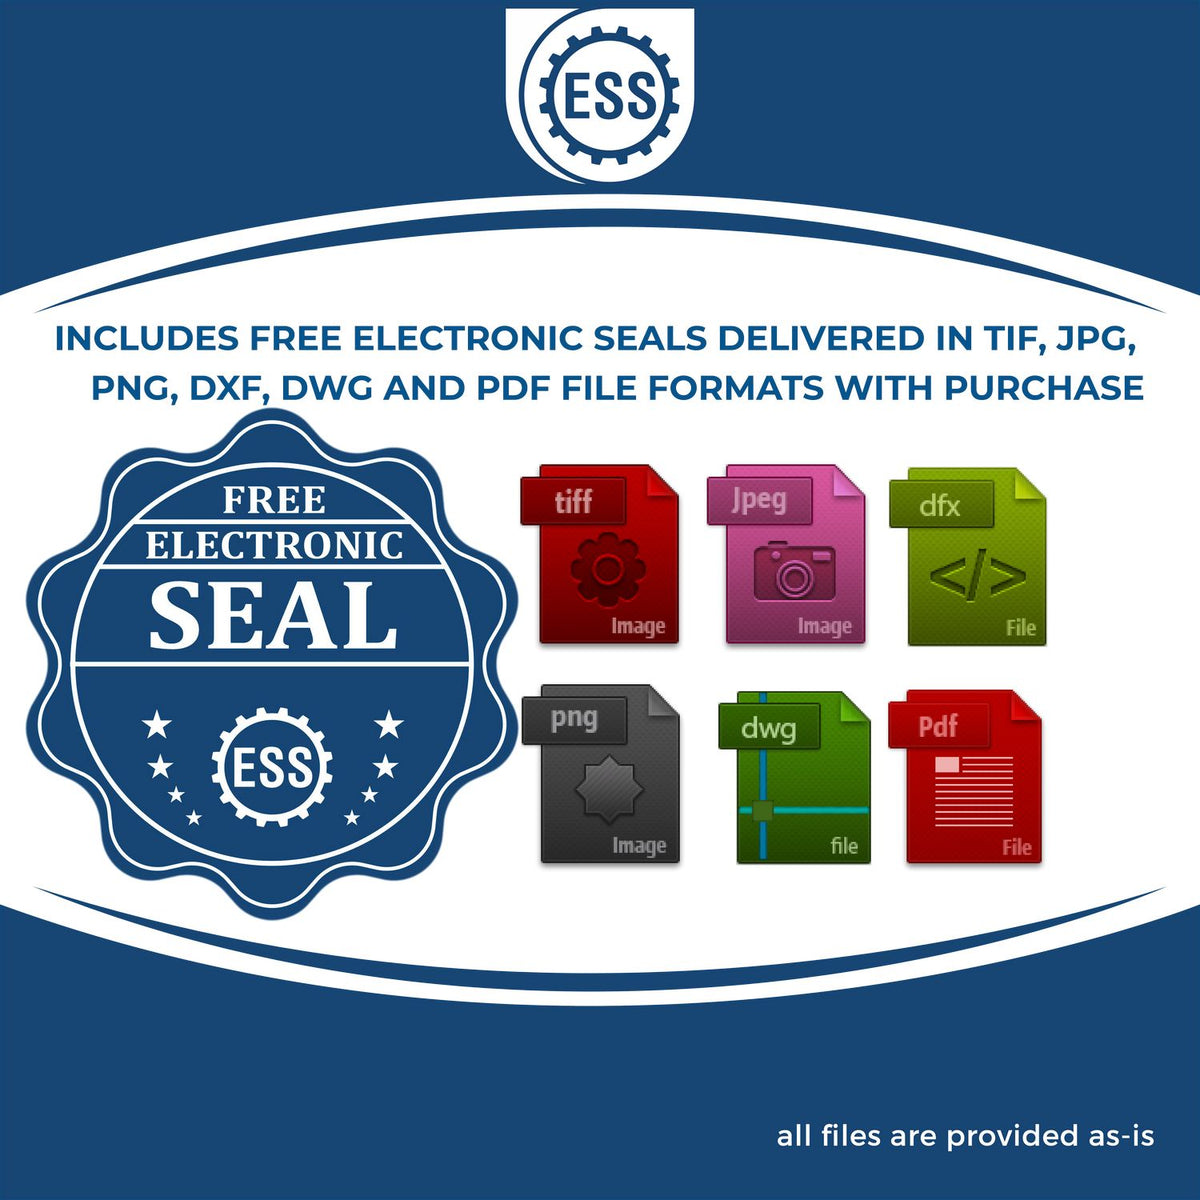 An infographic for the free electronic seal for the Wooden Handle Virginia State Seal Notary Public Stamp illustrating the different file type icons such as DXF, DWG, TIF, JPG and PNG.